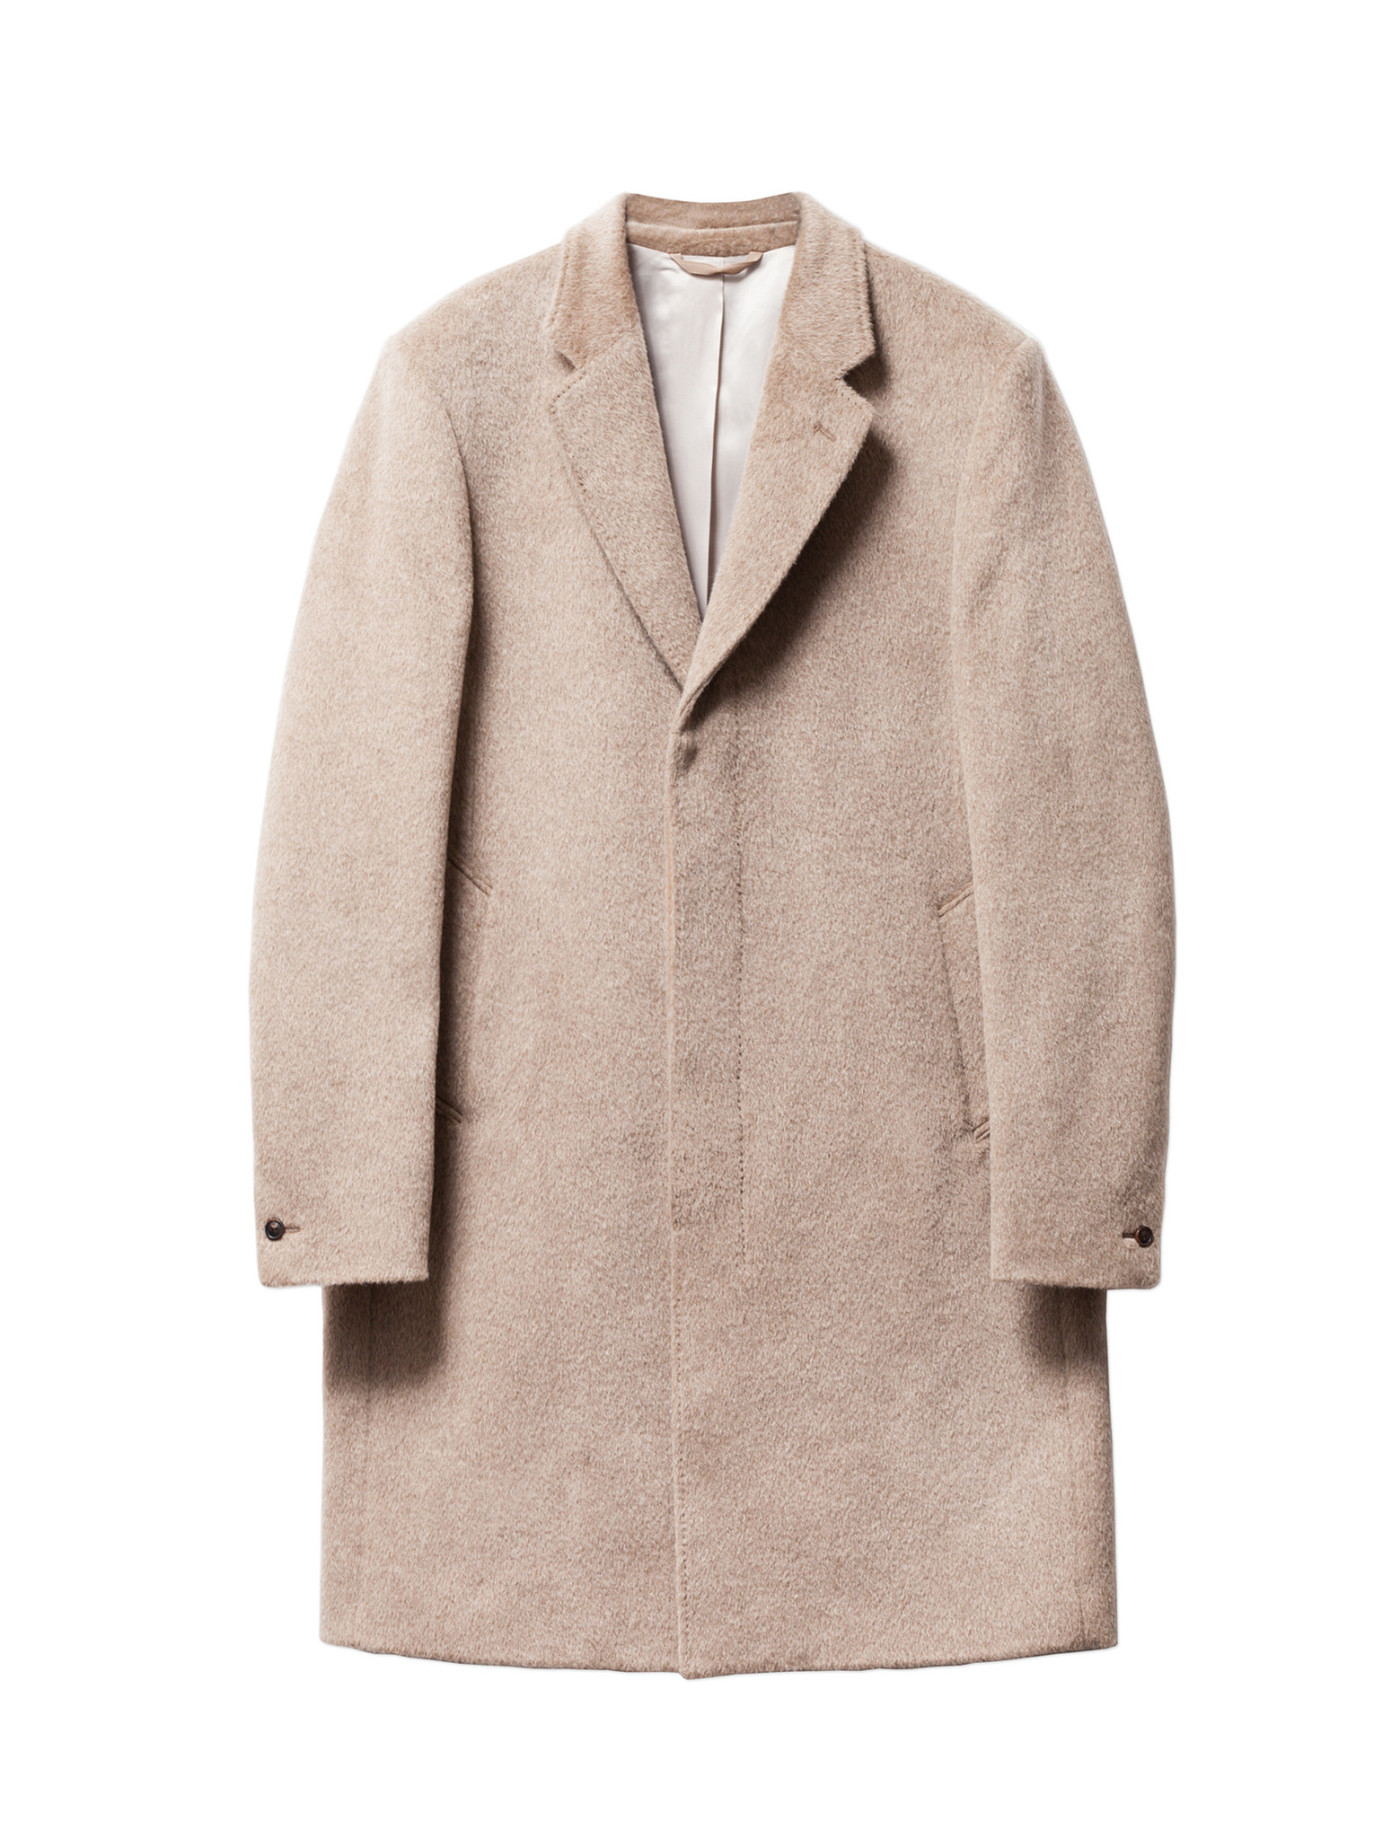 Celebrate Overcoat Season With Our Legacy | Complex